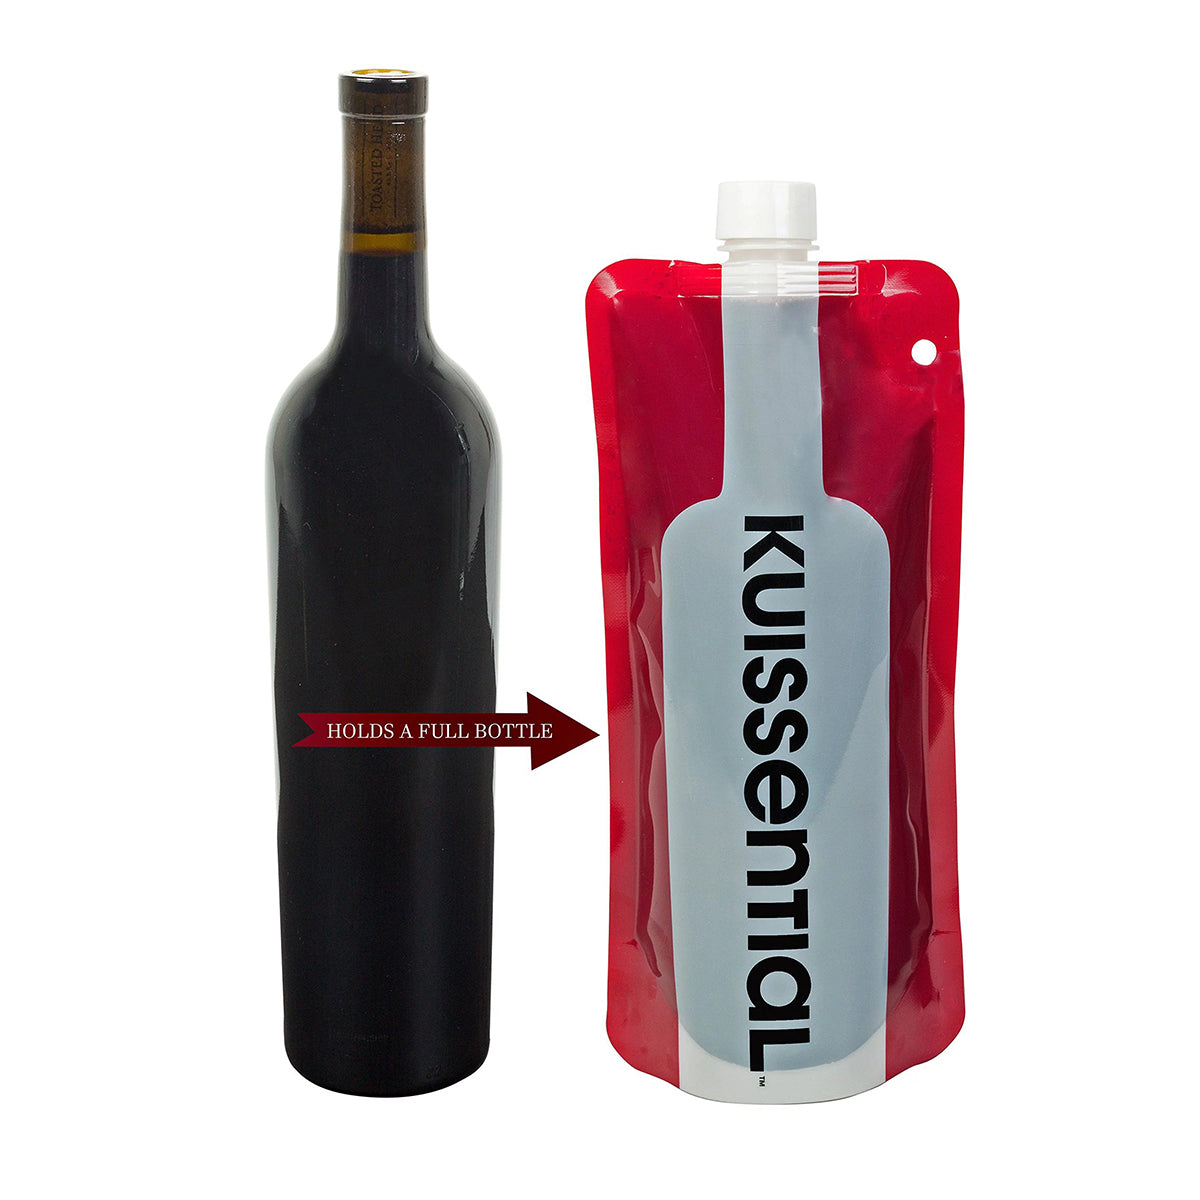 Kuissential 3pk Foldable Wine Bottles - Reusable, Portable, Easy To Pour